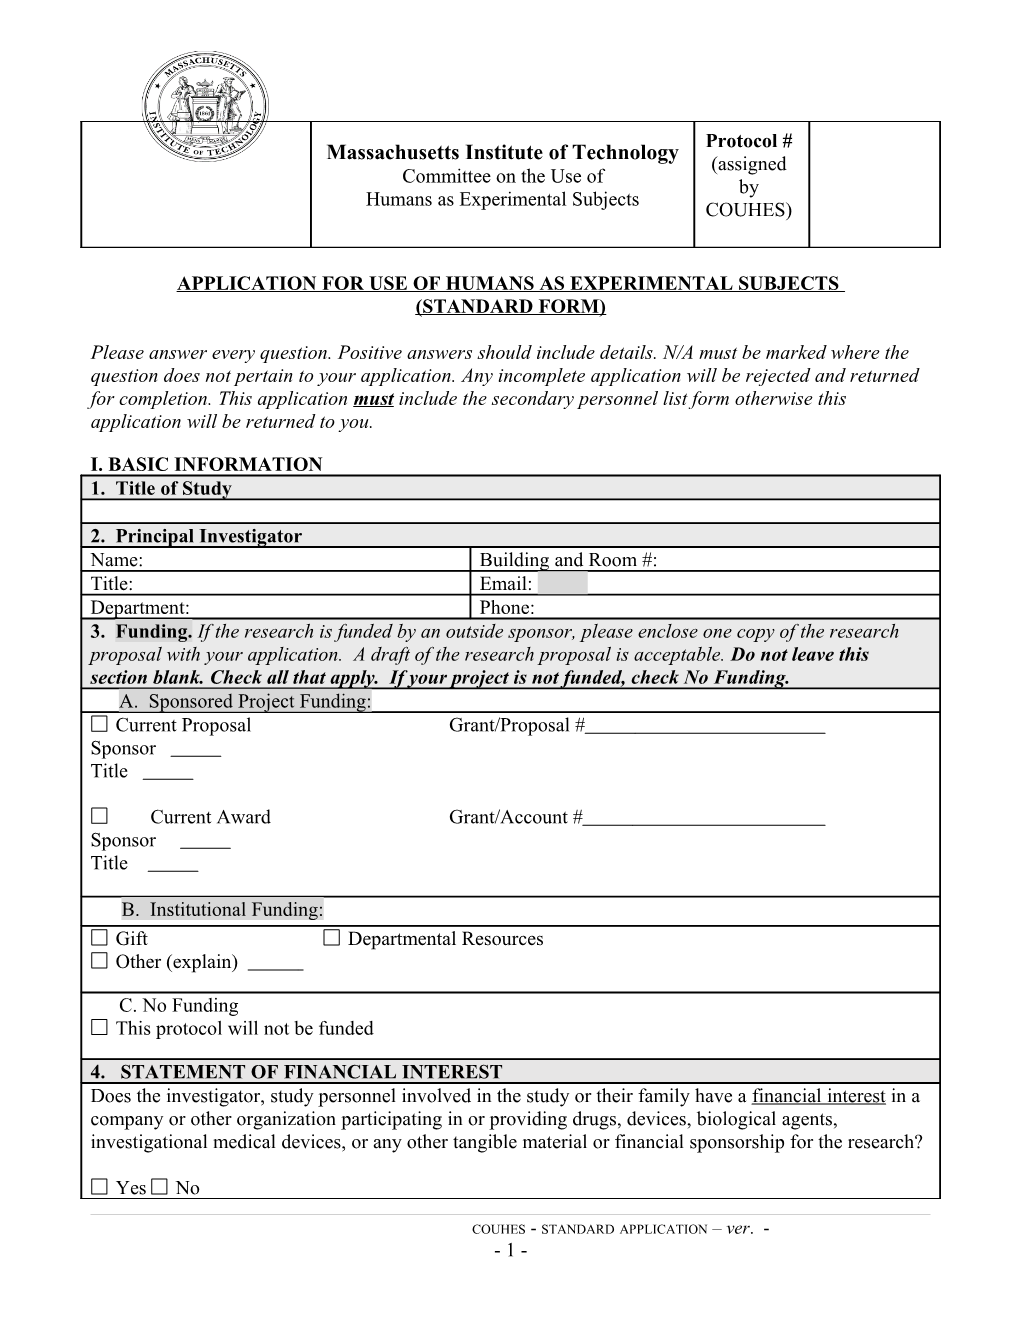 APPLICATION for USE of HUMANS AS EXPERIMENTAL SUBJECTS (Standard FORM)